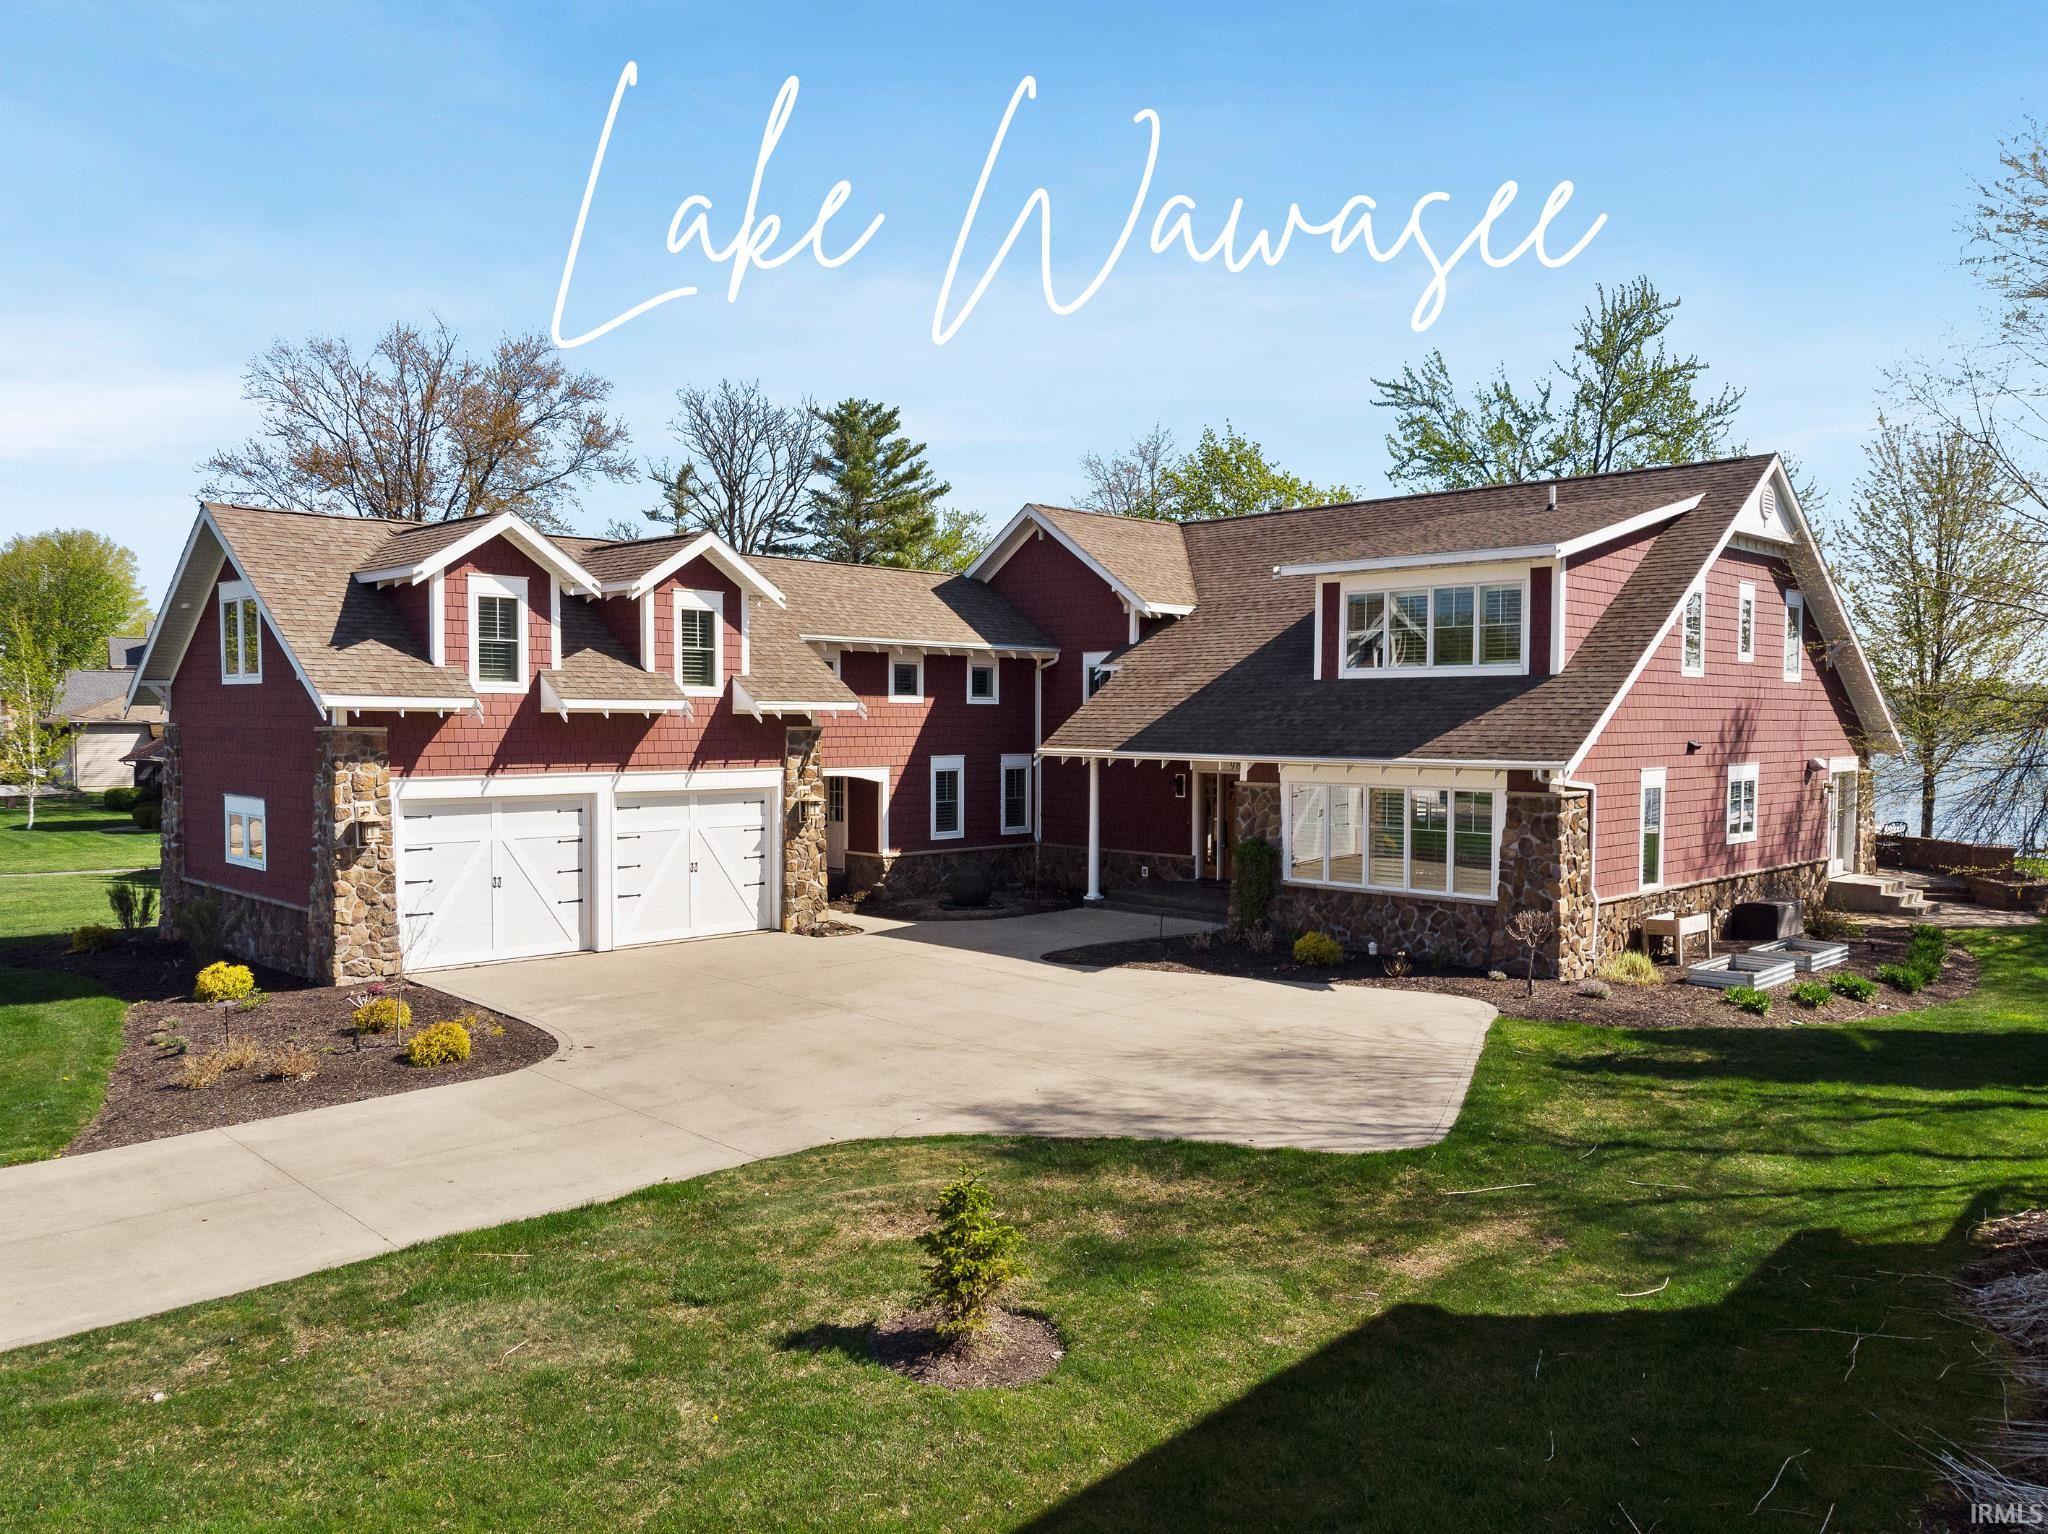 Gorgeous custom built home on Lake Wawasee w/plenty of room for family & friends (sleeps 24!) plus stunning 100’ lake & channel front for total of 200’ comes w/guest house & 2 car detached garage & boat house w/3 covered boat slips—ultimate lake retreat or year round home! Nestled on .58 acres in prestigious, private Bayshore Beach on zero through traffic road, this 7 bedroom, 6.5 bath home has everything you need for entertaining or enjoying gorgeous lakefront views. Stately main house faces E so you can catch sunrise from multiple rooms w/ attached 2 car garage, large parking apron & classic exterior of stone & shale siding. Impressive covered front entry has double sidelights allowing plenty of natural light into foyer linking to breathtaking open concept main living space featuring exposed beam coffered ceiling, beautiful hardwood floors & warm earth tone color palette. Inviting living area complemented by floor-to-ceiling river rock fireplace, wall of windows & glass doors to covered lakefront porch in addition to full wet bar w/ wine fridge & built-in storage. Chef’s delight kitchen has massive island w/ seating, abundant cabinetry, granite counters, tile backsplash & top of line SS appliances. You’ll notice attention to detail, quality craftsmanship & high end materials utilized throughout. Formal dining off kitchen offers wrap around lake views w/2 sets of glass doors leading to outdoor living spaces. Luxurious main floor primary bedroom stars waterfront views, private porch entrance & ensuite bath w/double sink vanity, soaking tub & tiled walk-in shower. Carpeted rec room off kitchen, half bath, cozy office & laundry/mud room w/ built-in storage & utility sink complete main level. Upstairs is amazing array of 5 more bedrooms (4 w/ensuite baths & 1 shared) as well as 2nd laundry room for your convenience. Many bedrooms hold multiple beds together w/ big bunk room w/ built-in beds & ample storage at every turn—excellent for guests, parties or any kind of hosting. Kick back & relax by lake on covered or uncovered patios w/ built-in fireplace & spectacular views w/piers front & back. Guest house/cottage on channel provides additional 812 sq ft, is charming and entirely functional w/ full kitchen, spacious living/dining, 1 bedroom, bath & attached covered boat slip. Detached 2 car garage also channel side has 2 covered boat slips. This one of a kind home must be experienced—reach out today! Pier# 404 & 405. See linked virtual tour!